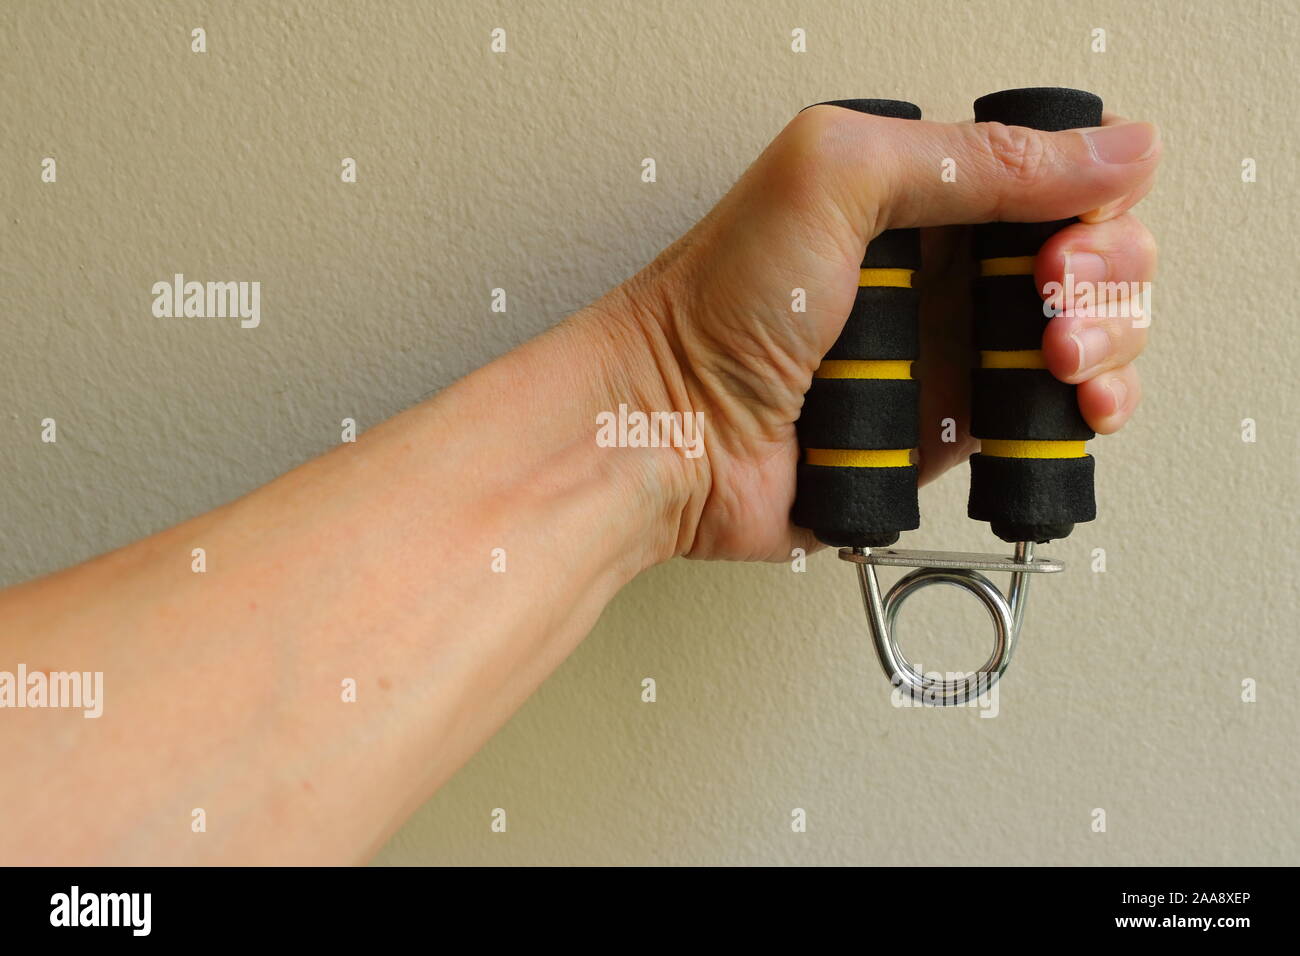 Closeup left hand holding and squeezing hand strengthener, this tool can be used for stress relief and enhance hand power ability Stock Photo